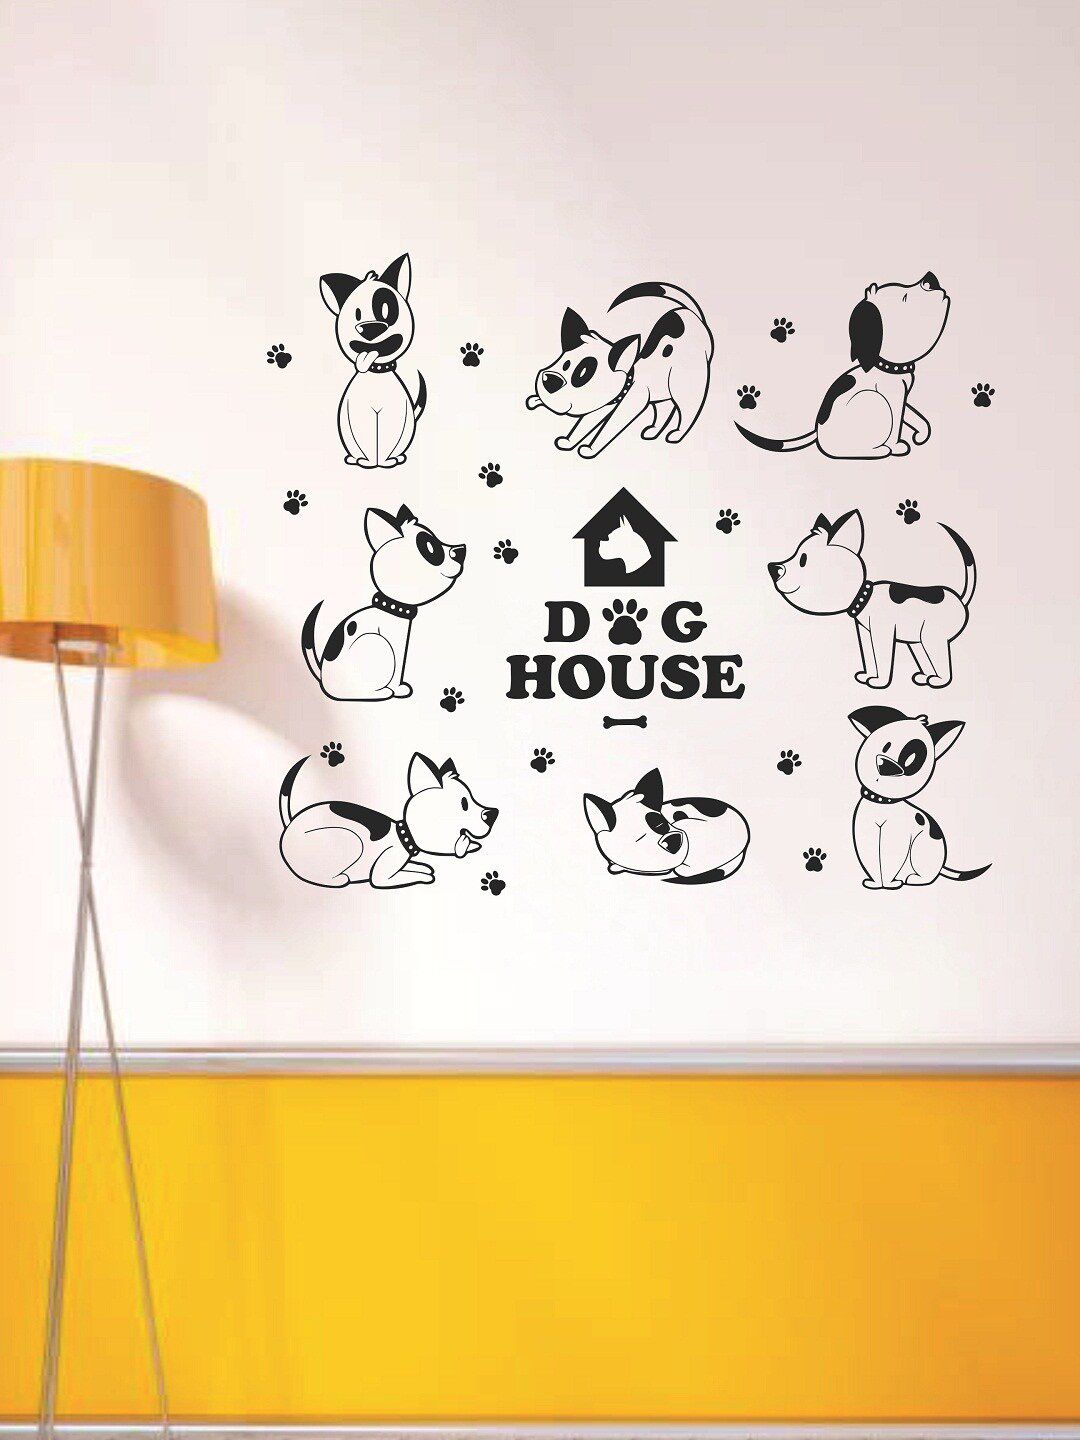 WALLSTICK Black Dog House Large Vinyl Wall Sticker Price in India